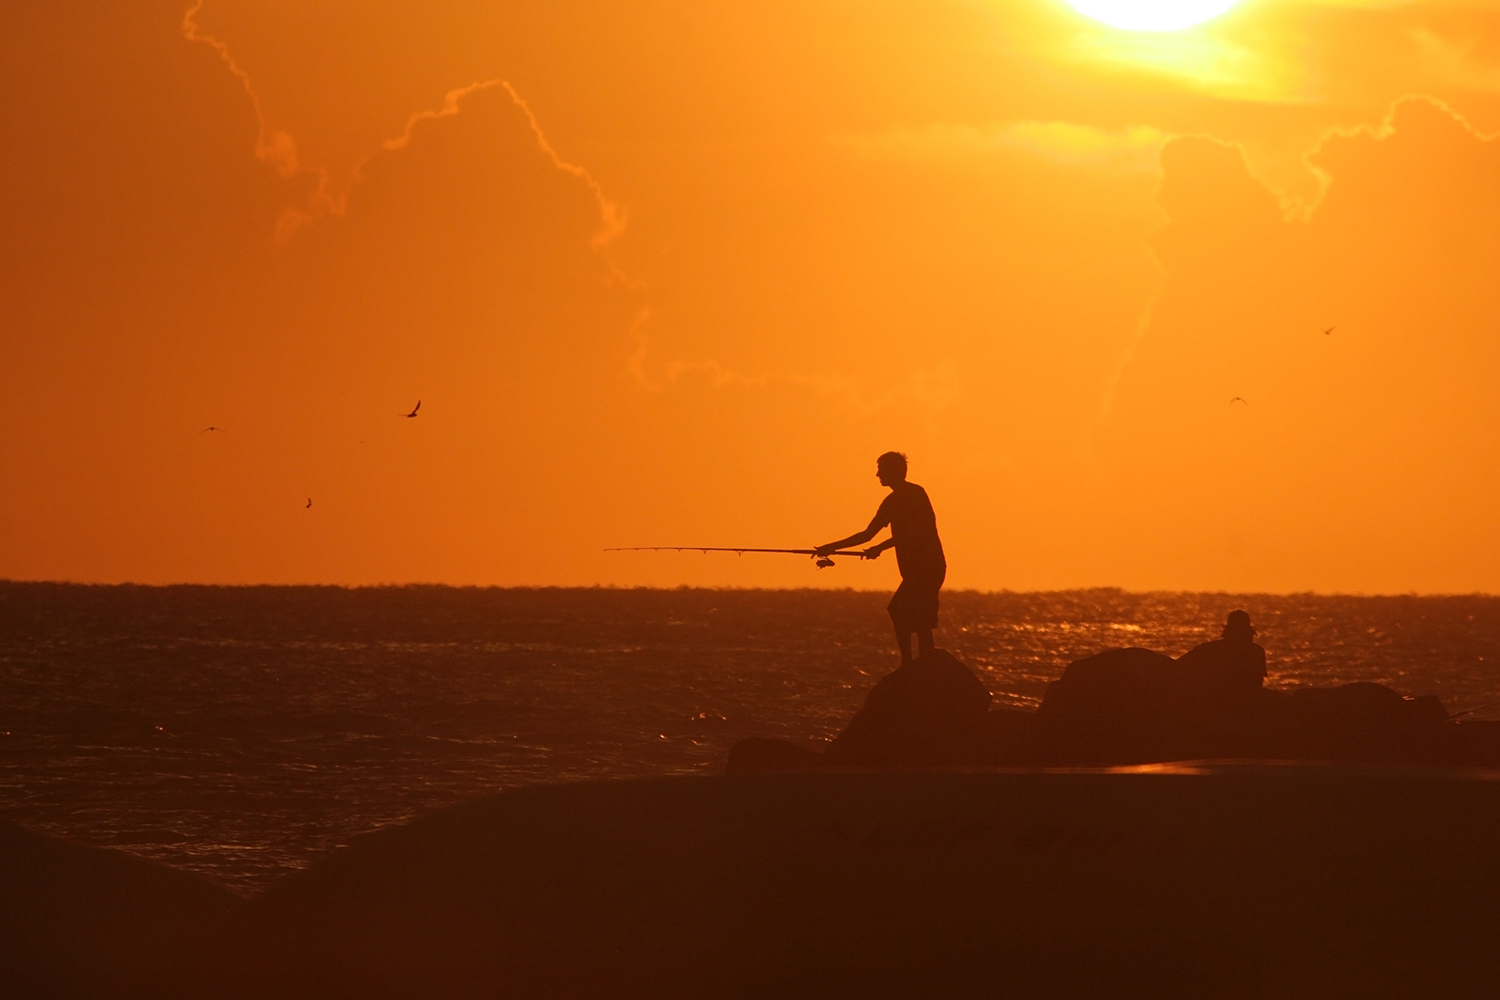 Silhouette of man fishing at sunset as seagulls fly around.